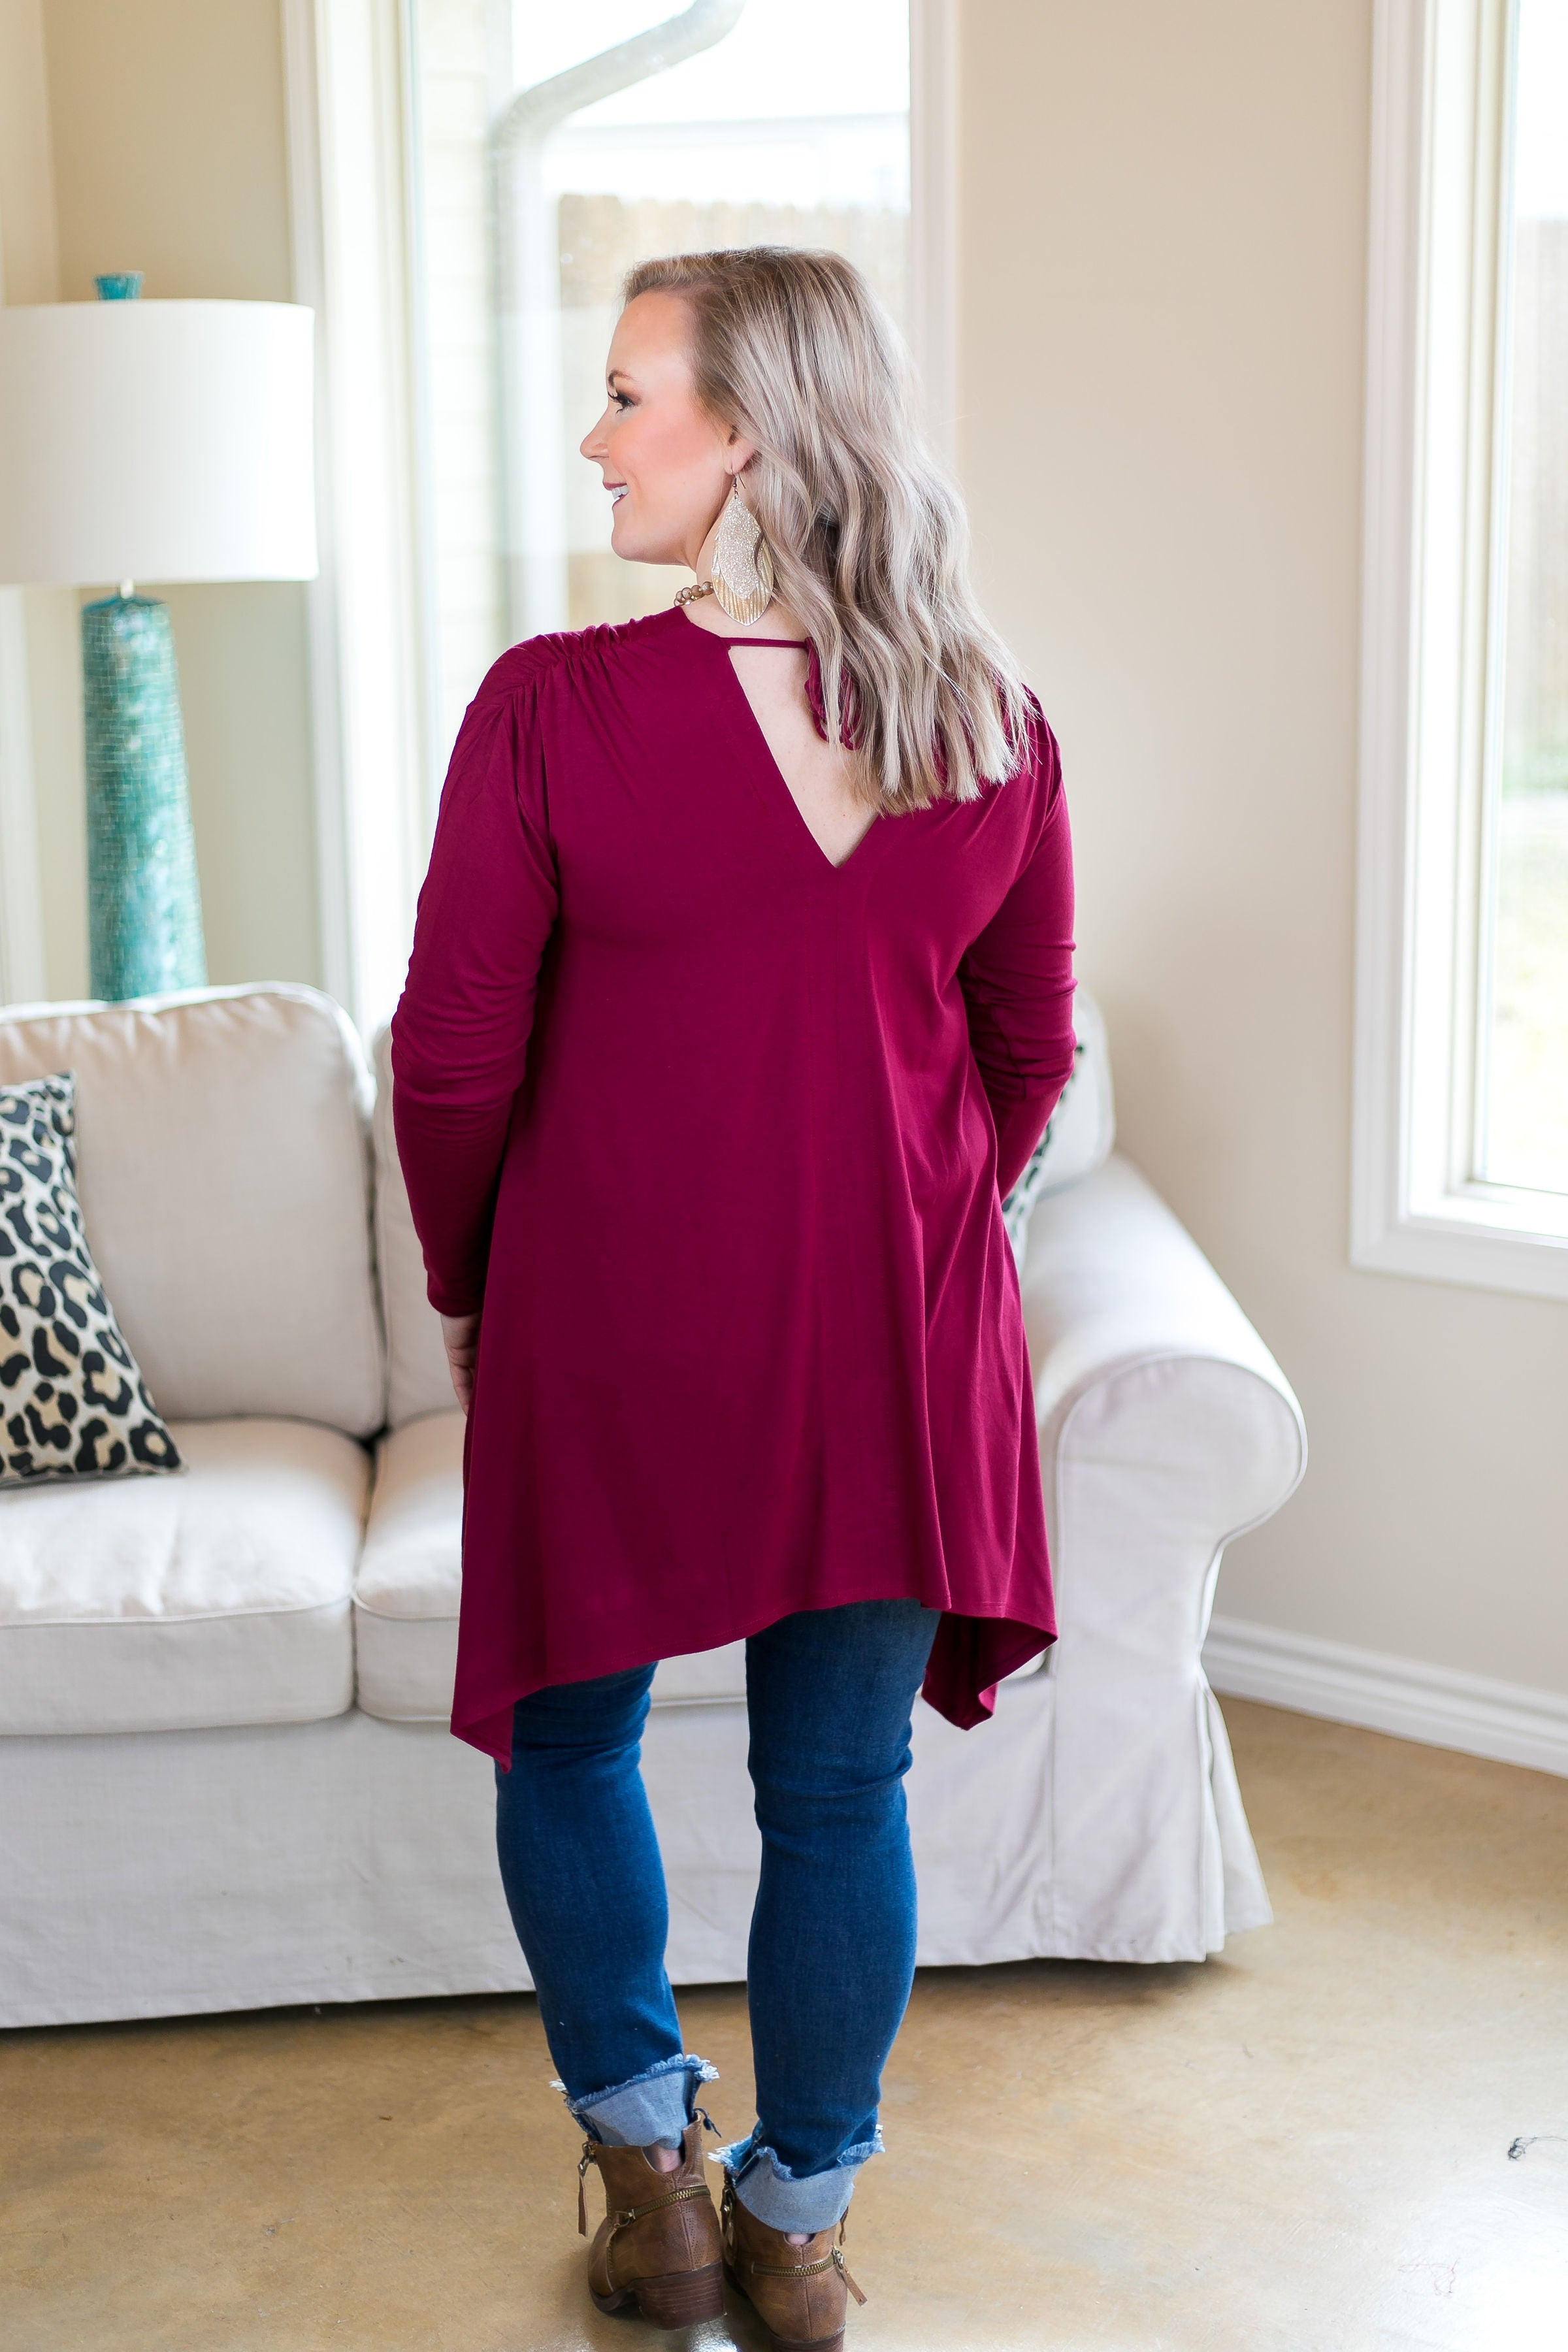 These Days Handkerchief Tunic in Maroon - Giddy Up Glamour Boutique